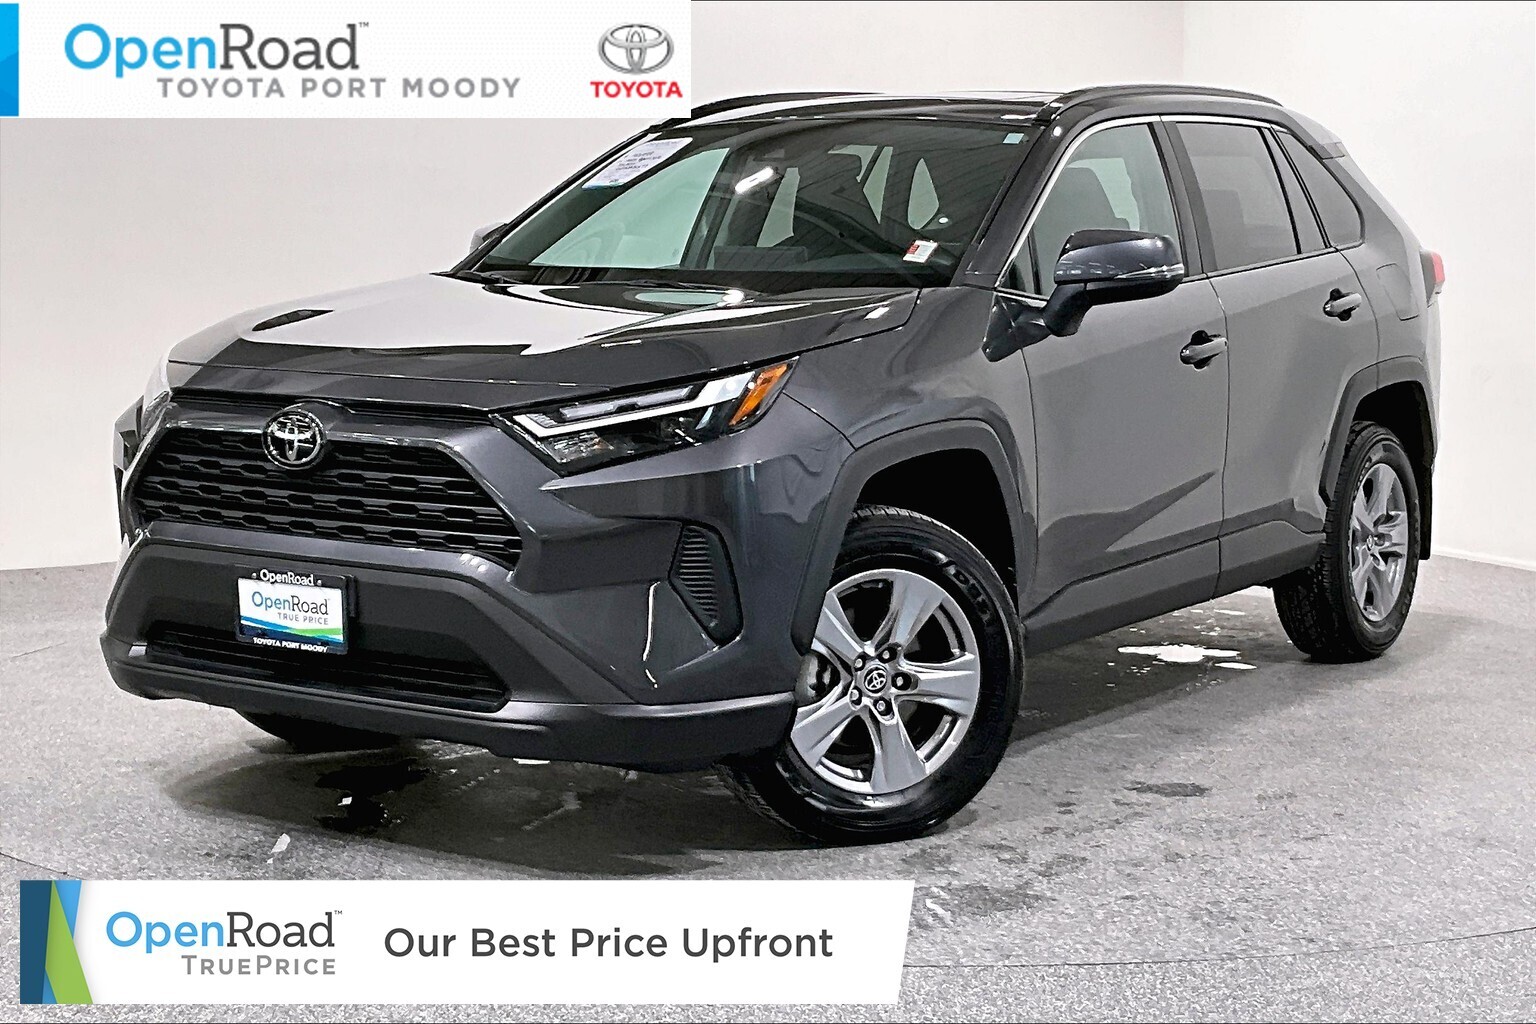 2023 Toyota RAV4 XLE AWD |OpenRoad True Price |Local |One Owner |Se